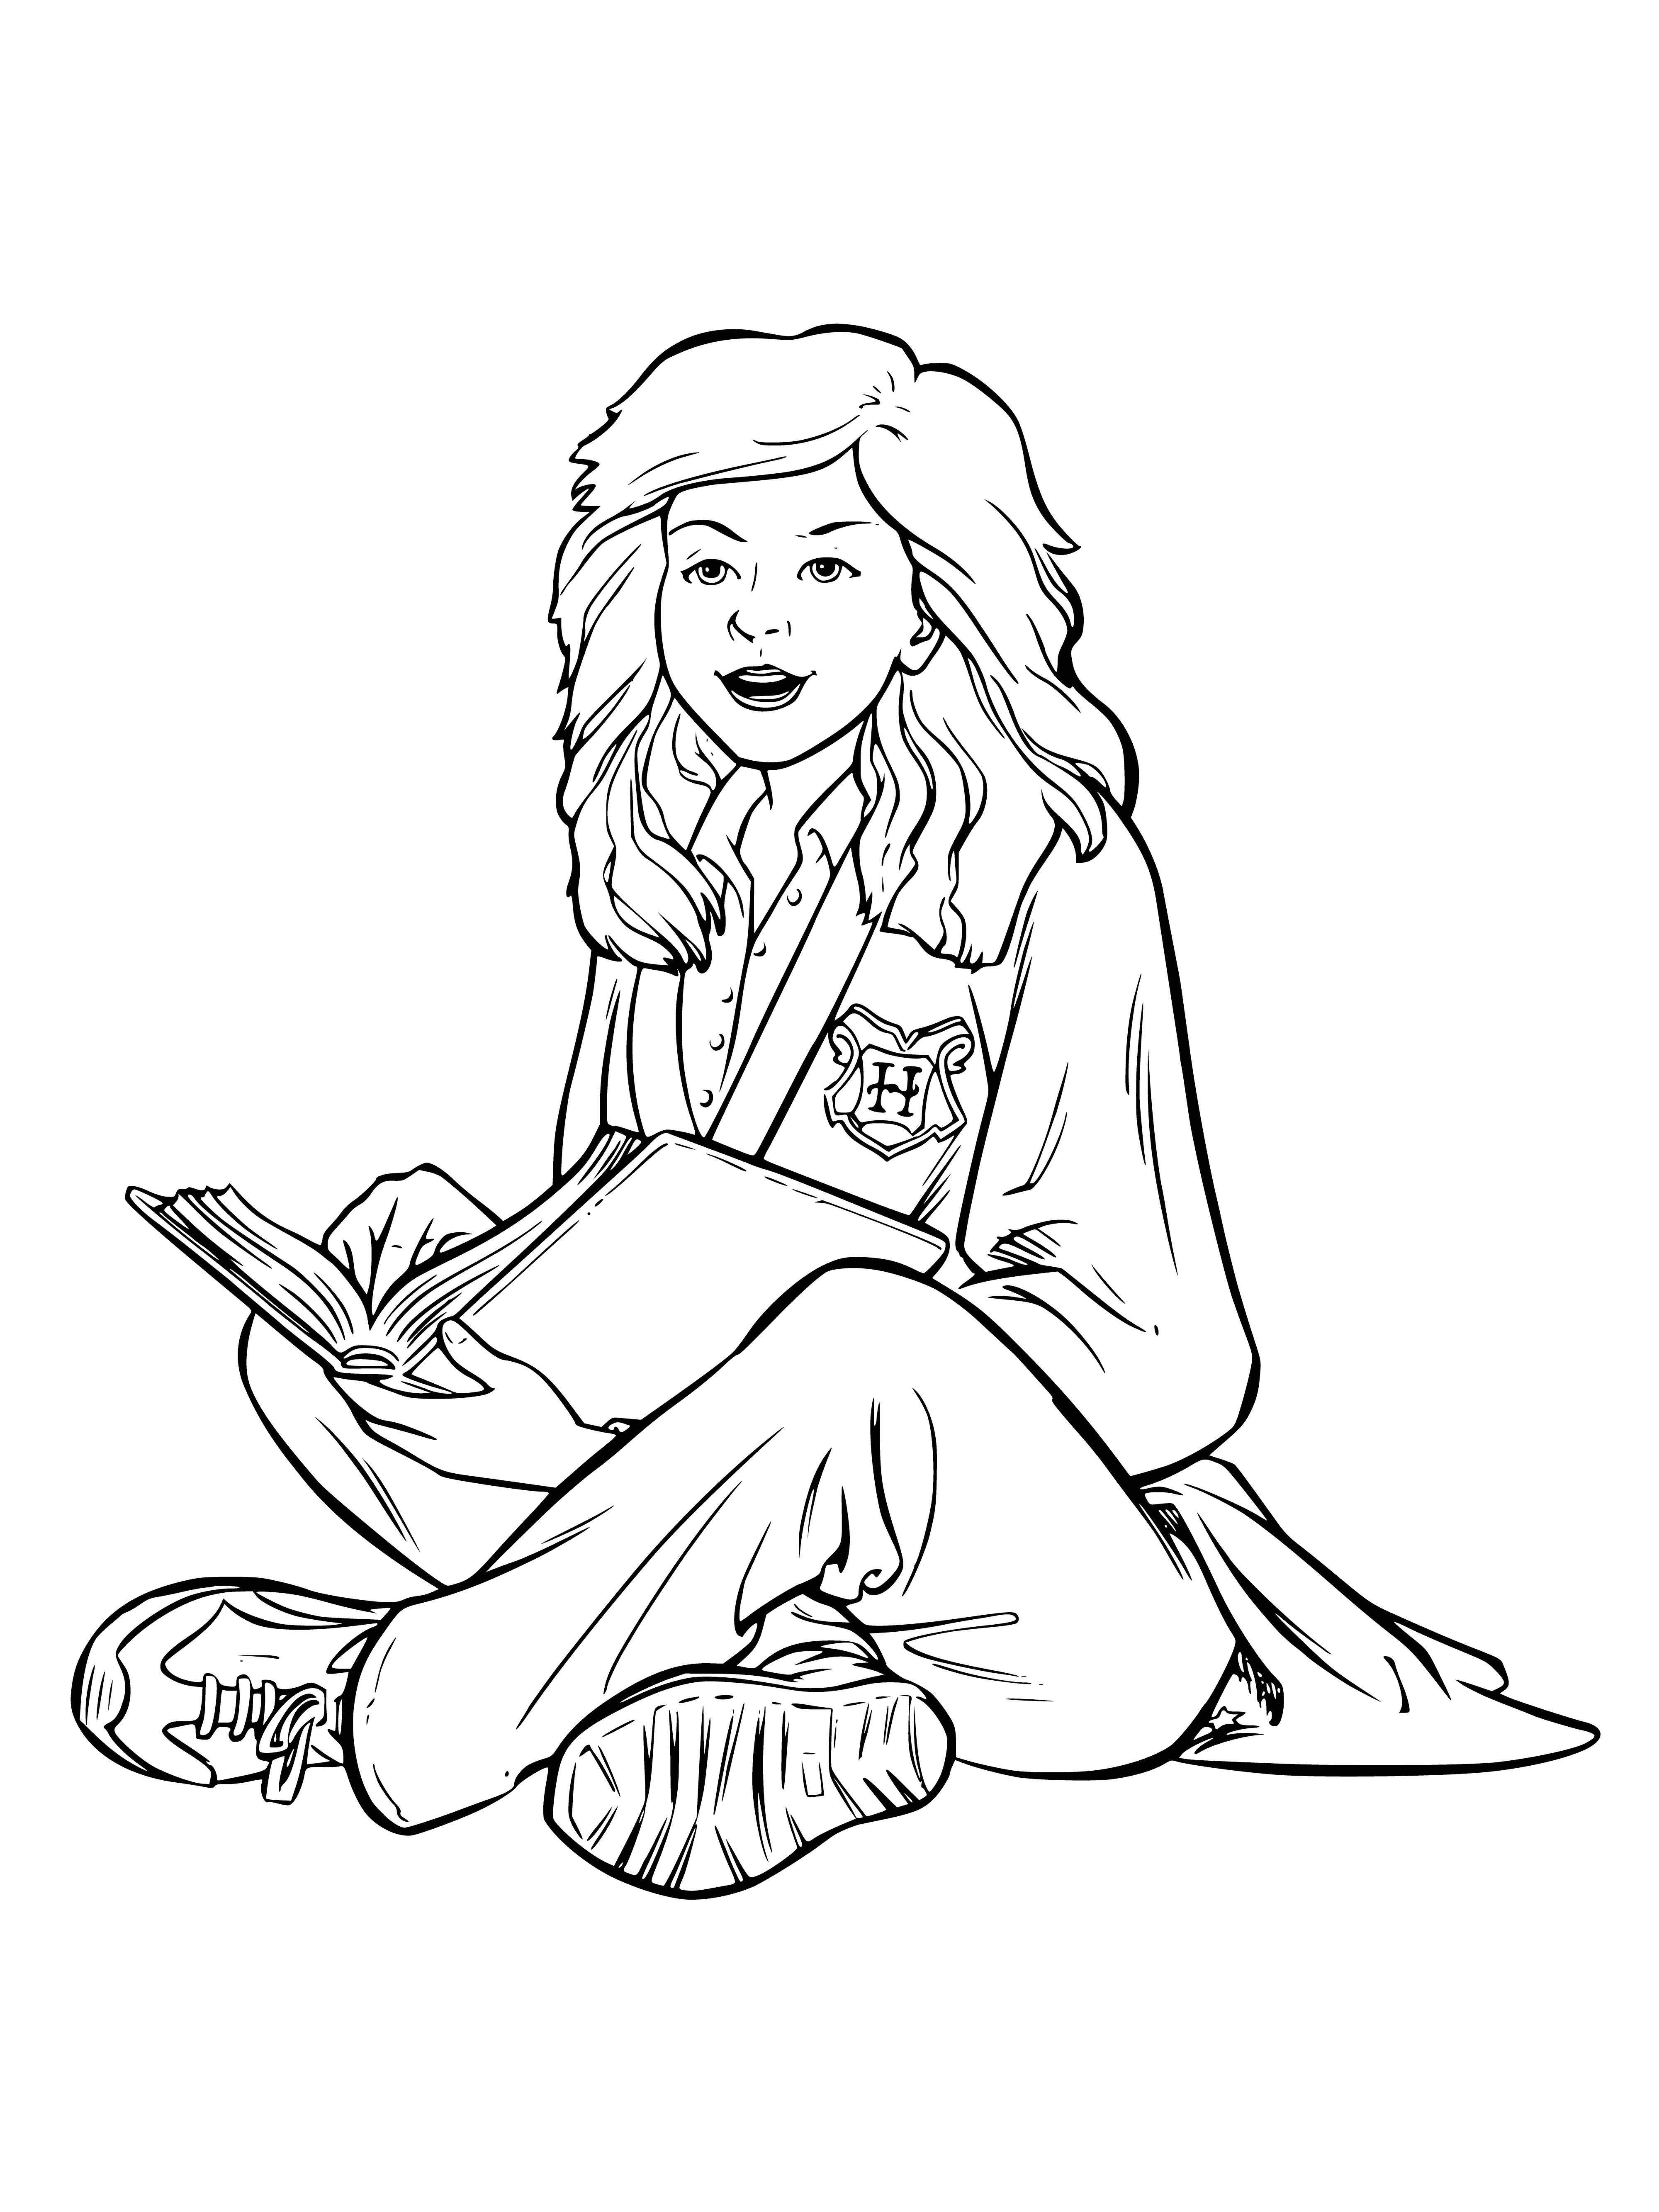 coloring page: Girl lost in thought, engrossed in a book, glasses on, hair in messy bun. Sitting in a chair with legs crossed.